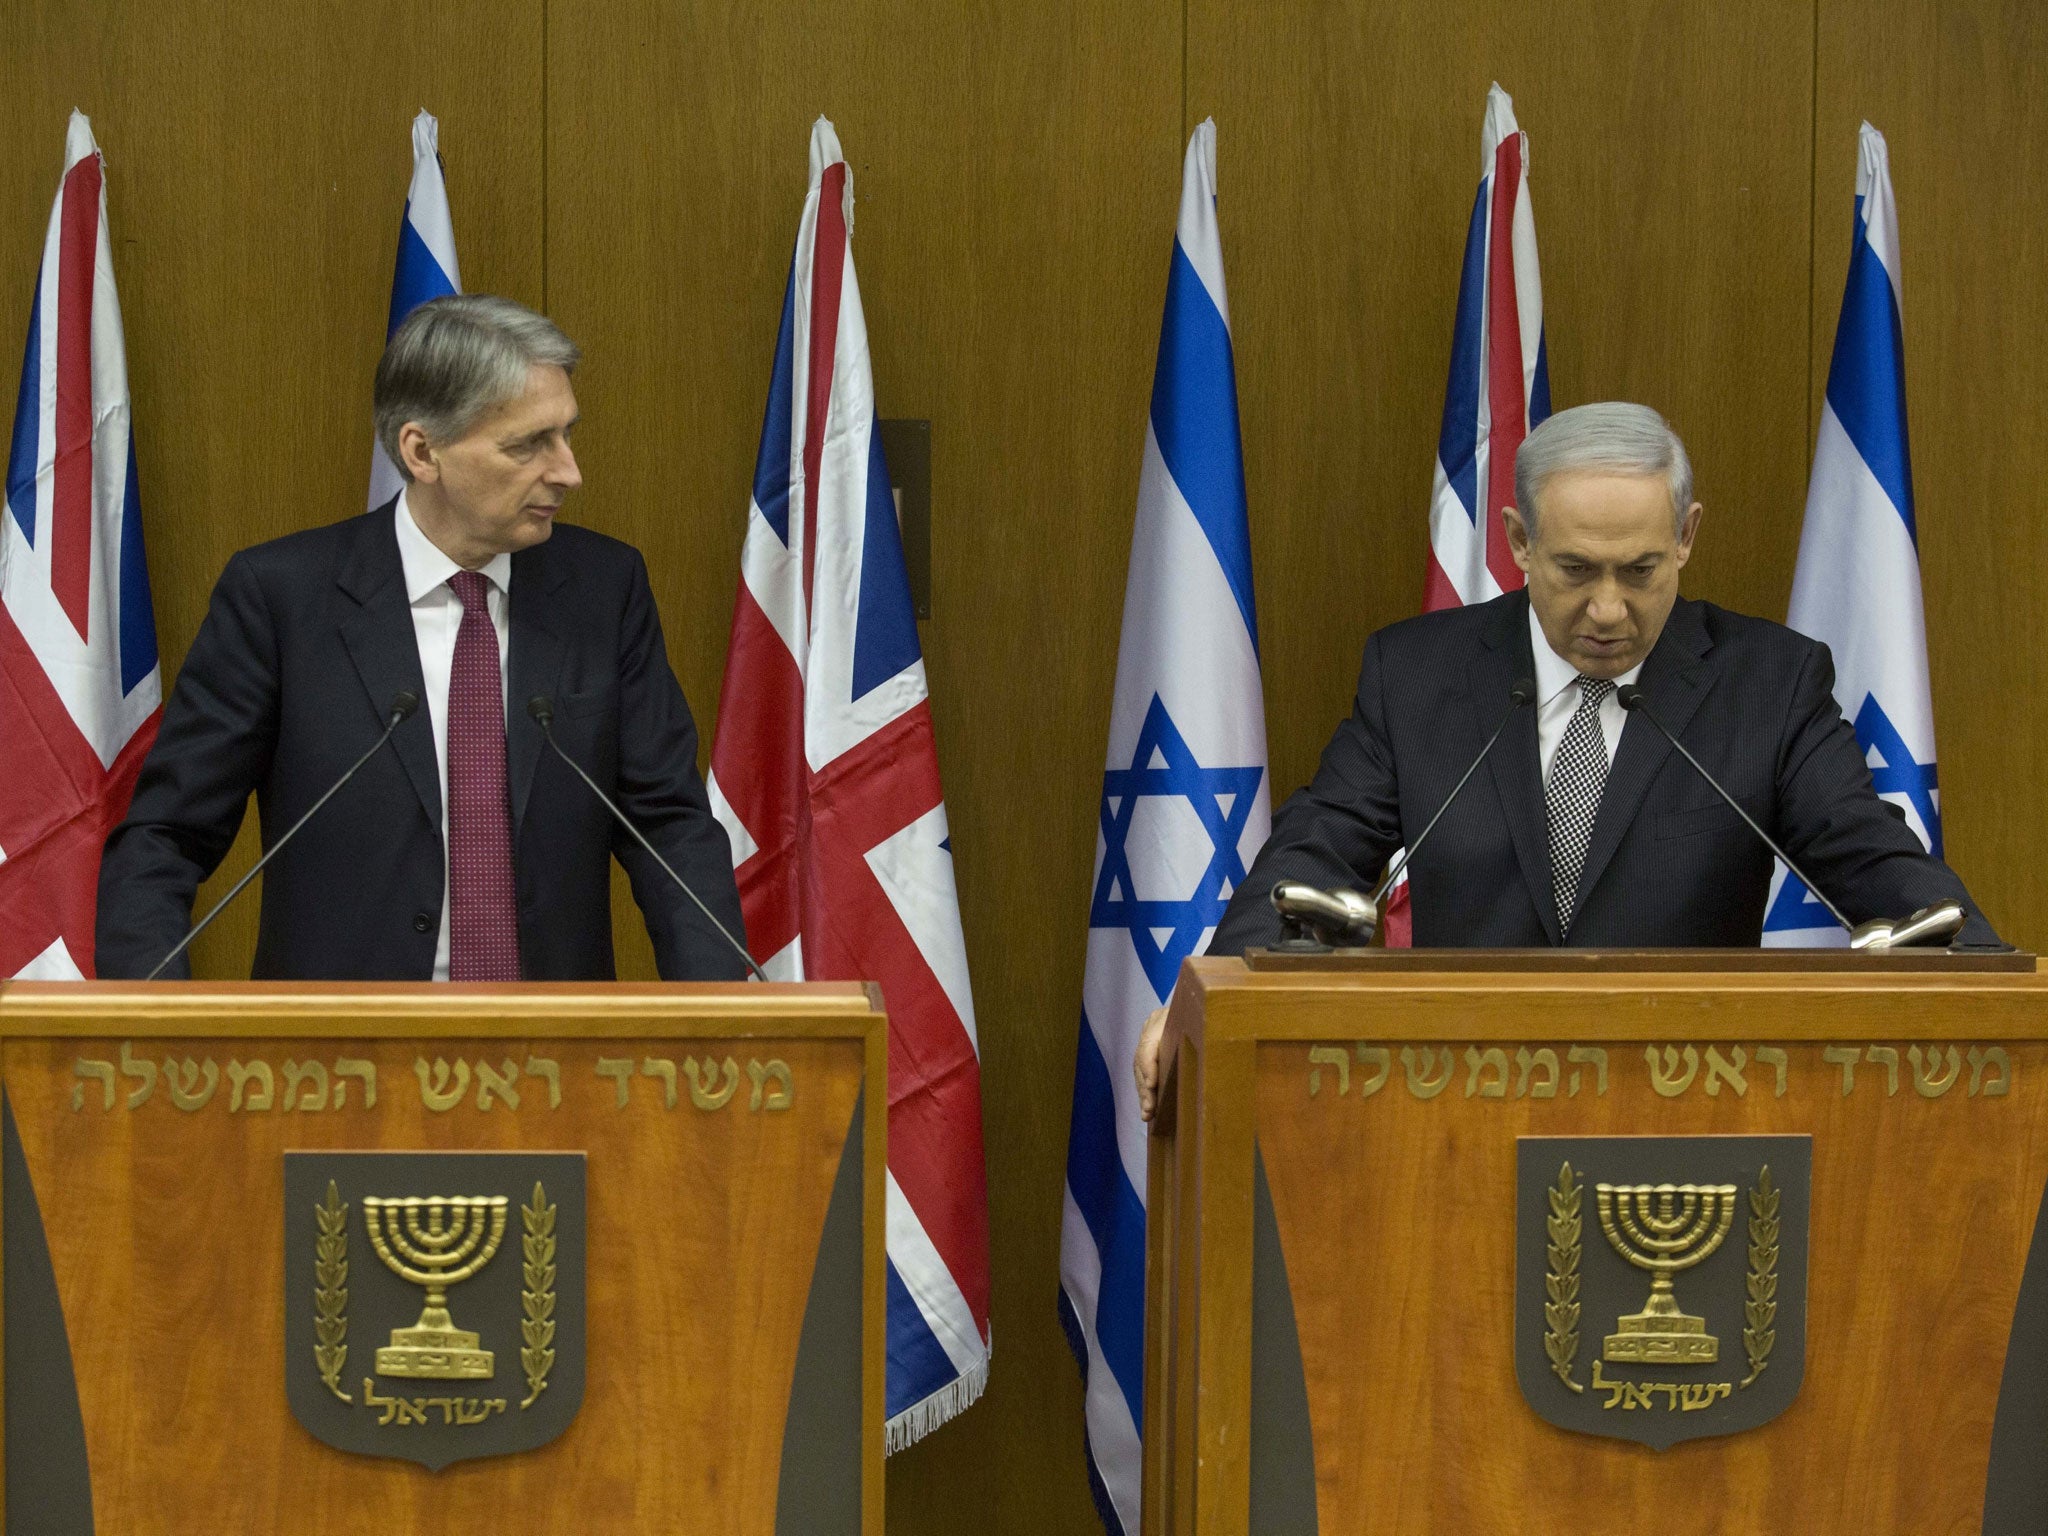 Israeli Prime Minister Benjamin Netanyahu (R) with British Foreign Secretary Philip Hammond during a joint press conference at the Israeli Knesset, in Jerusalem, Israel, 24 July 2014